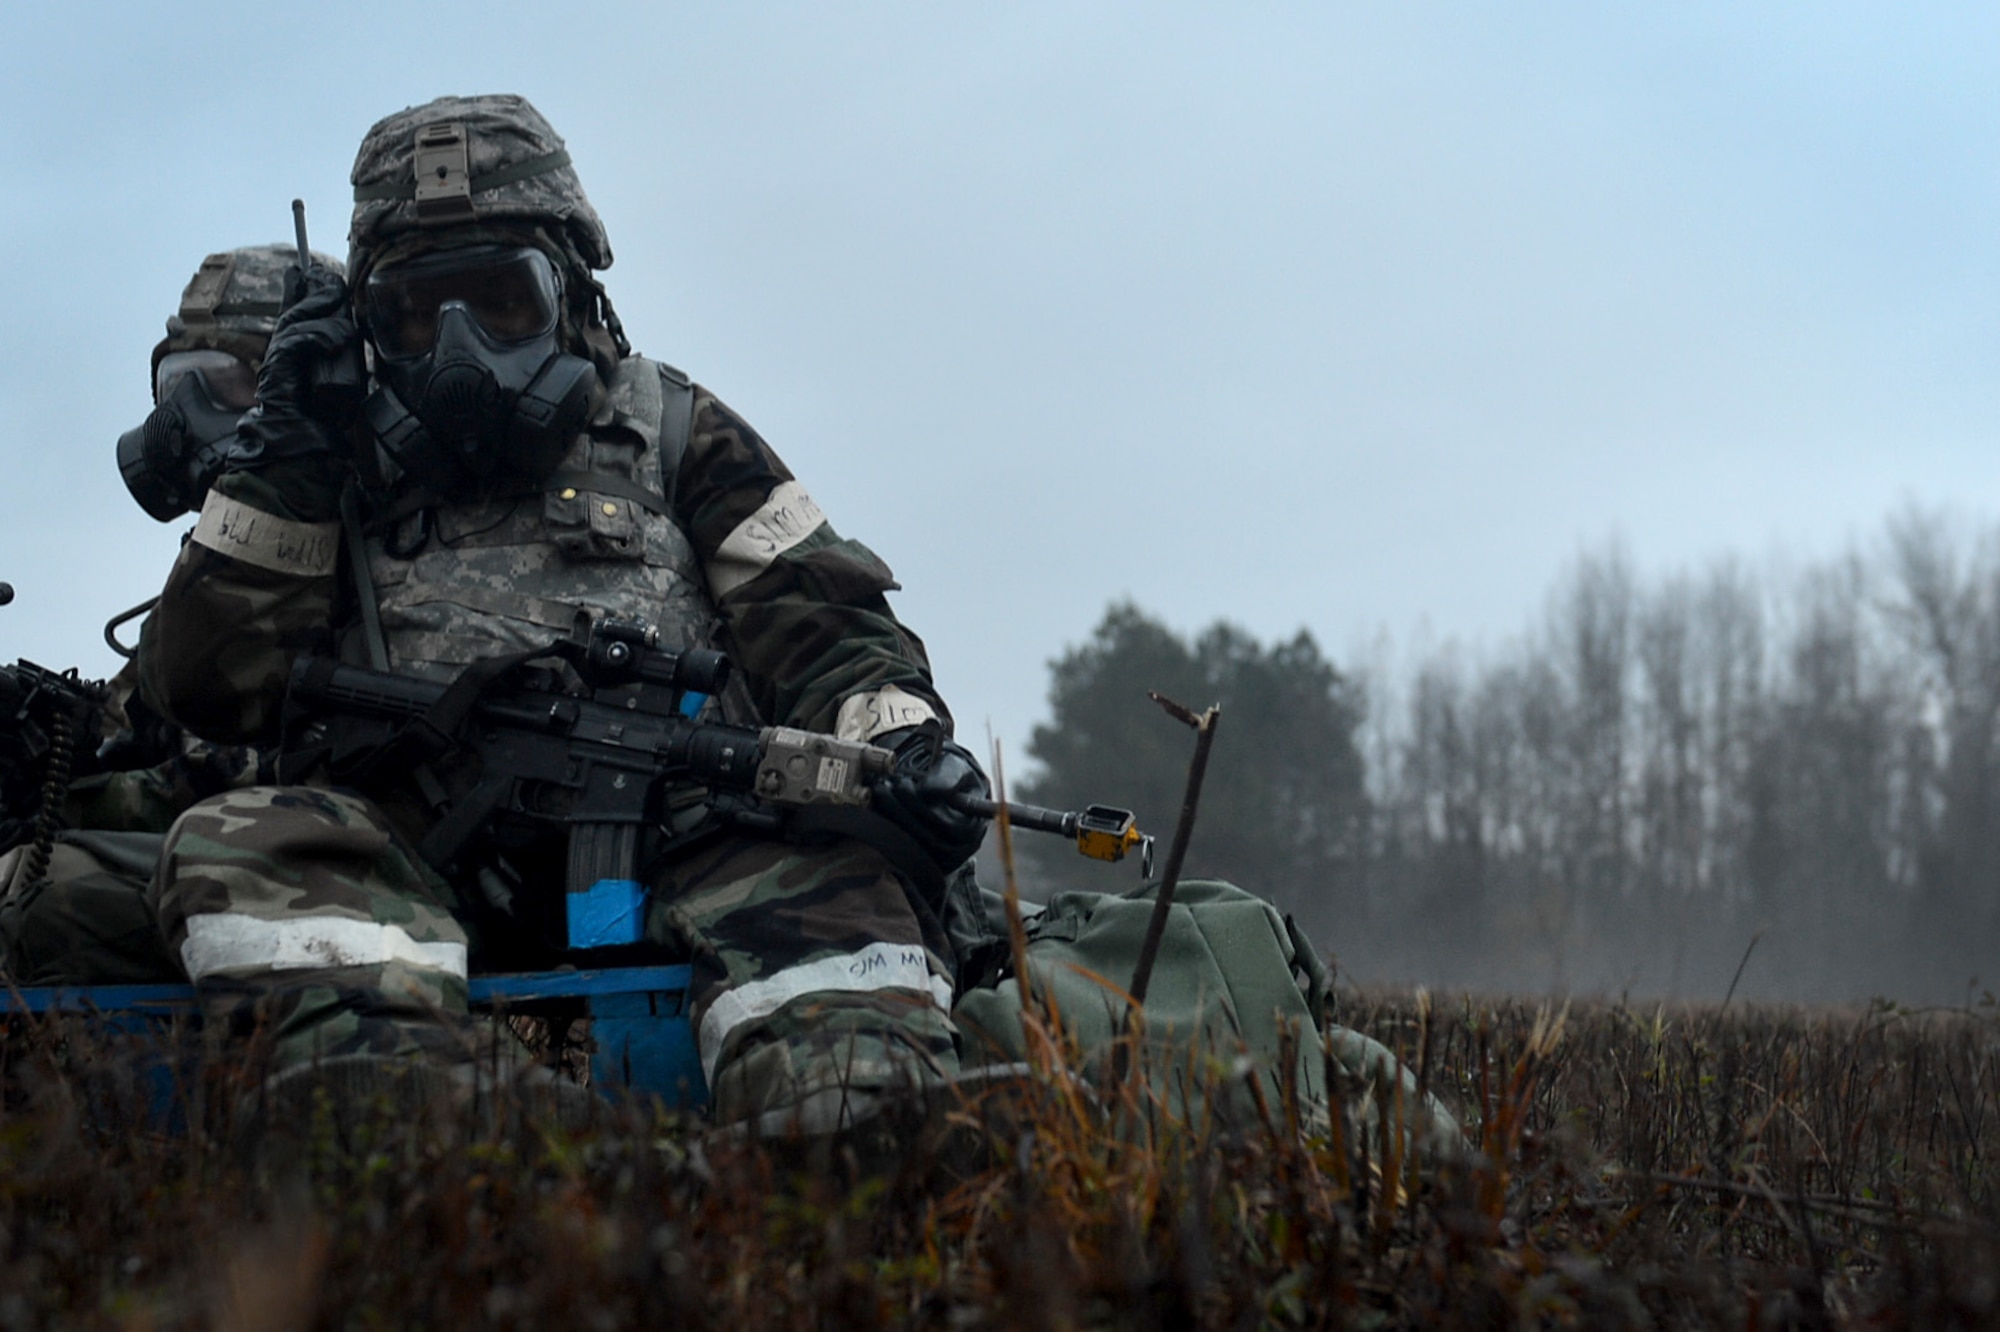 A U.S. Airman assigned to the 20th Fighter Wing listens to a land mobile radio during a Poinsett Ready Weasel Adaptive Basing Exercise at Poinsett Electronic Combat Range, near Wedgefield, S.C., Dec. 6, 2017.